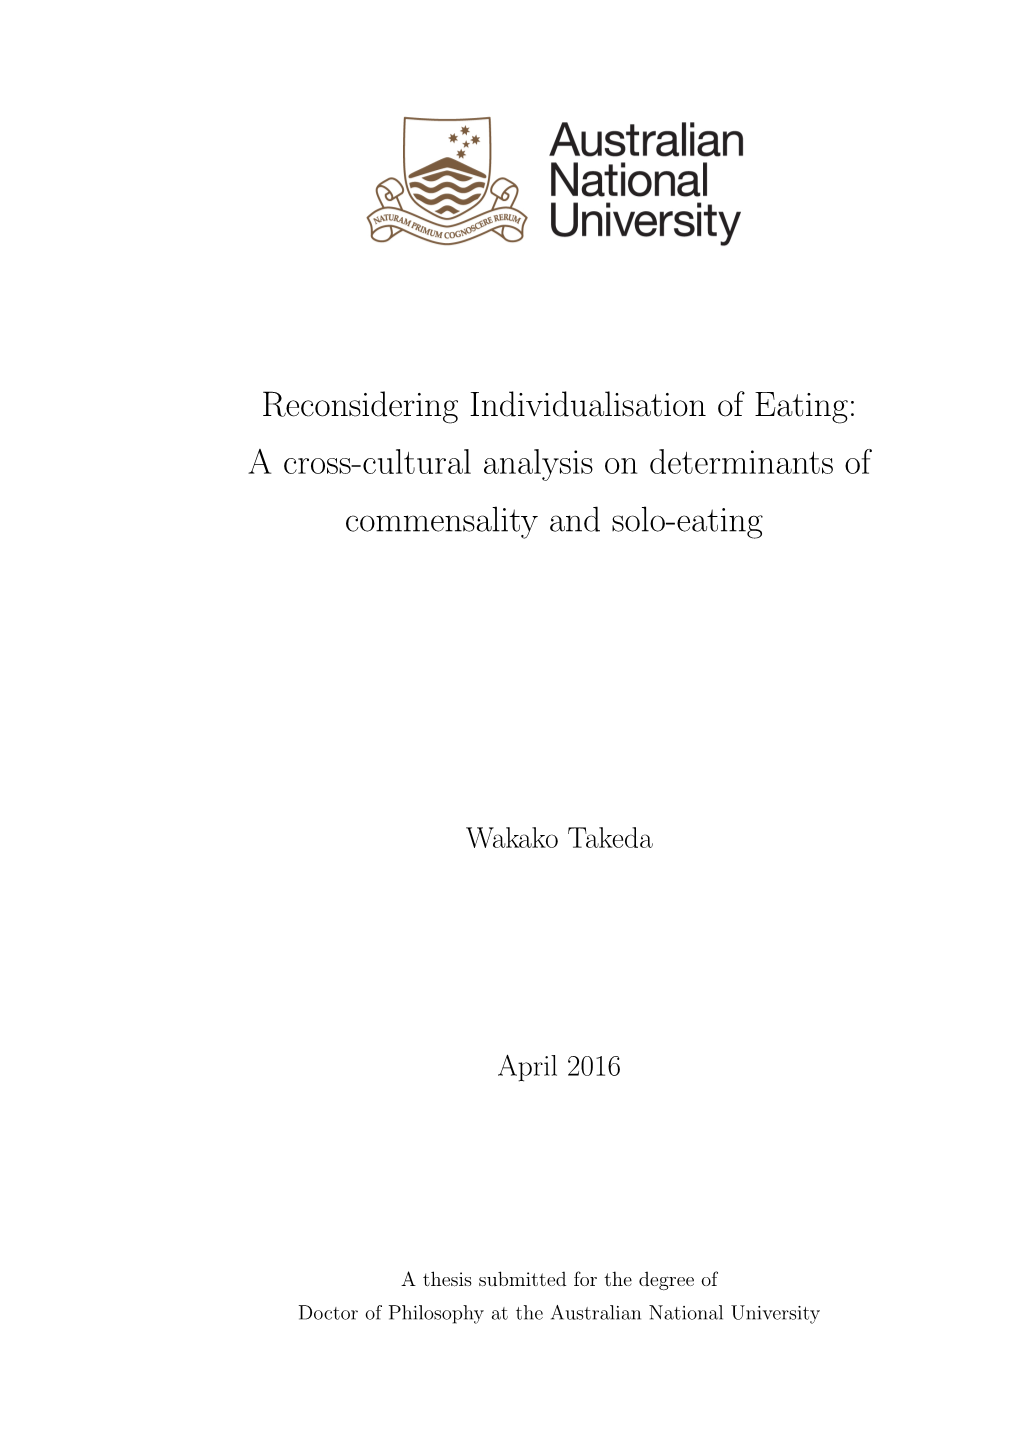 Reconsidering Individualisation of Eating: a Cross-Cultural Analysis on Determinants of Commensality and Solo-Eating